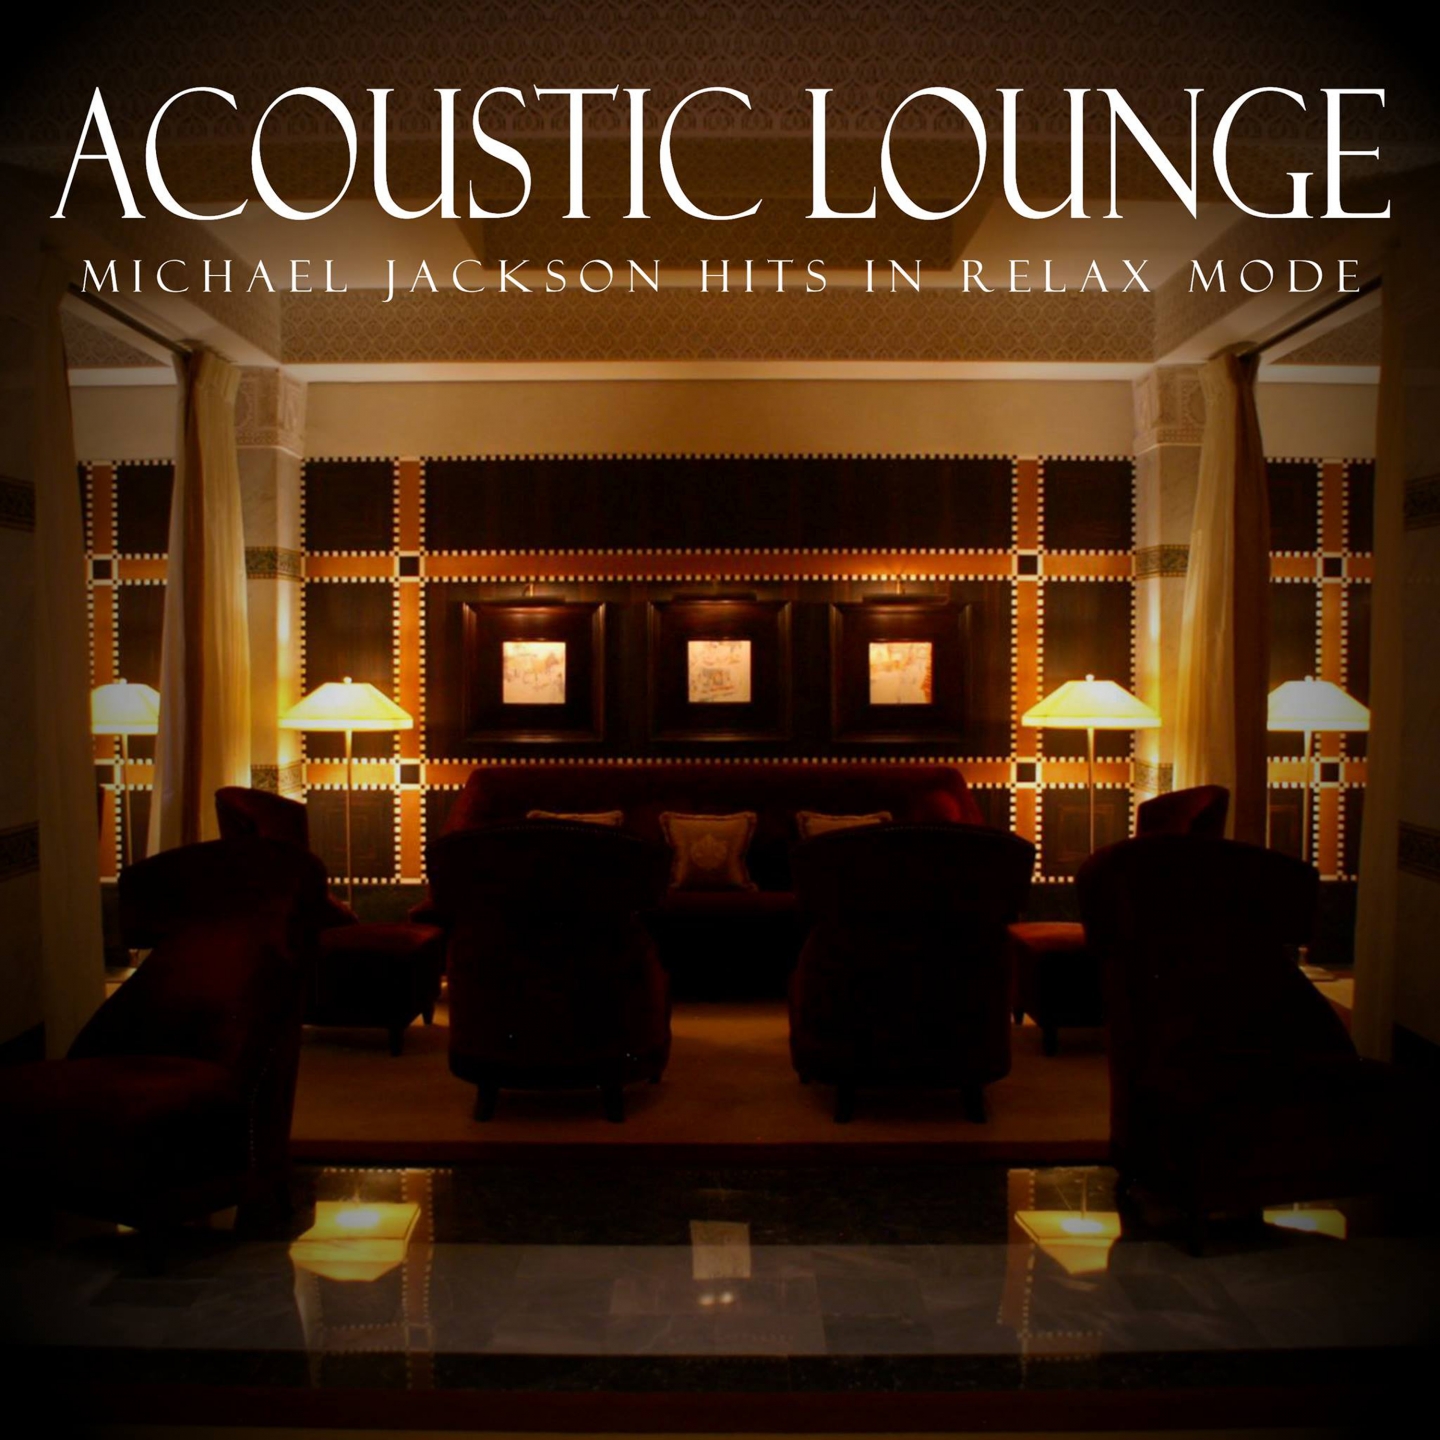 Acoustic Lounge: Michael Jackson Hits in Relax Mode